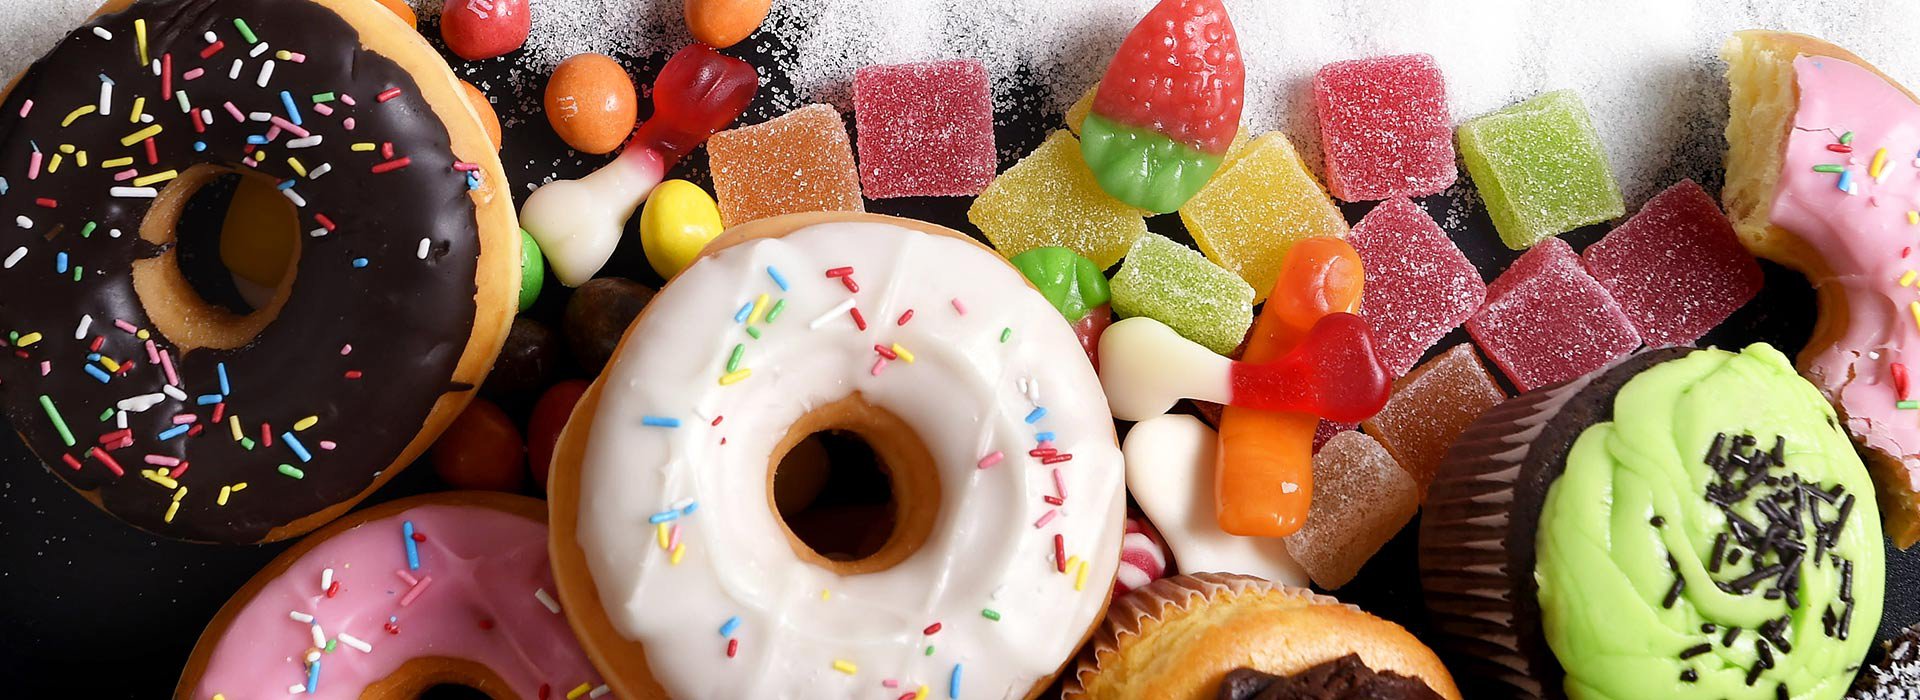 New Image International:Sugar – Just how much is too much?